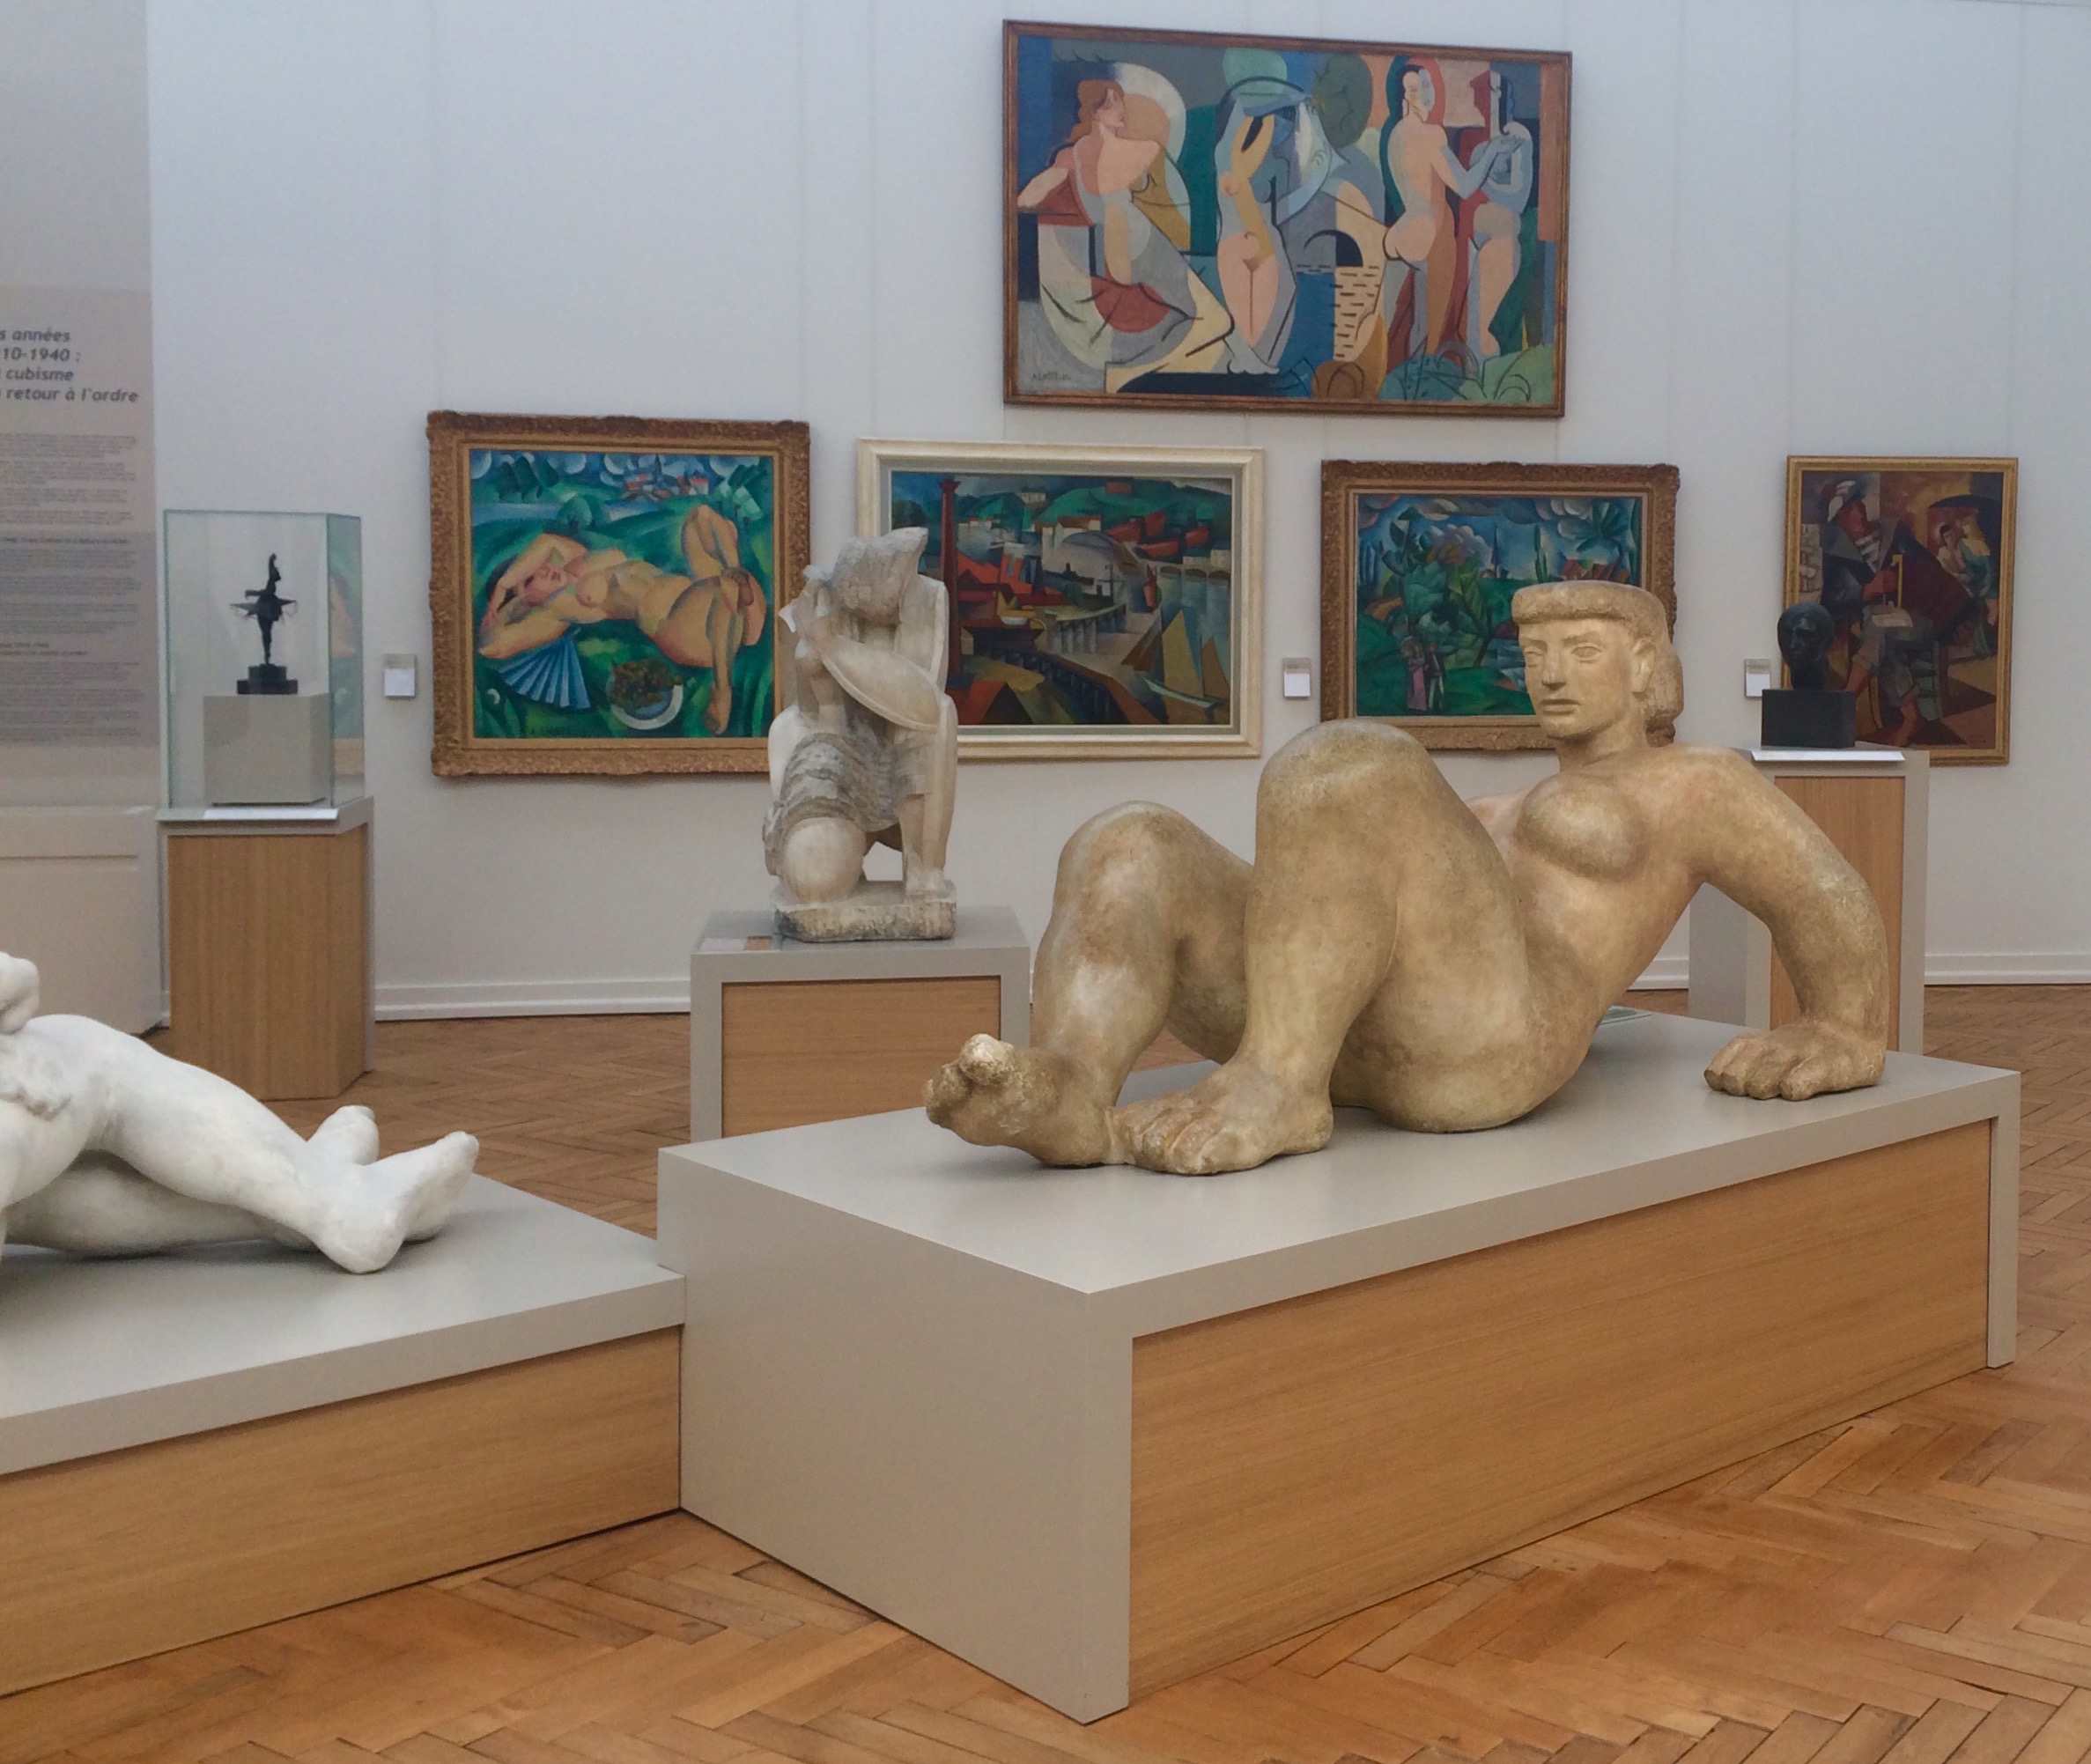 Paintings by Picasso, bronzes by Degas and massive sculptures by Bordeaux-native son Joseph Rivière at the Musée des Beaux-Arts. Photos by Marla Norman.